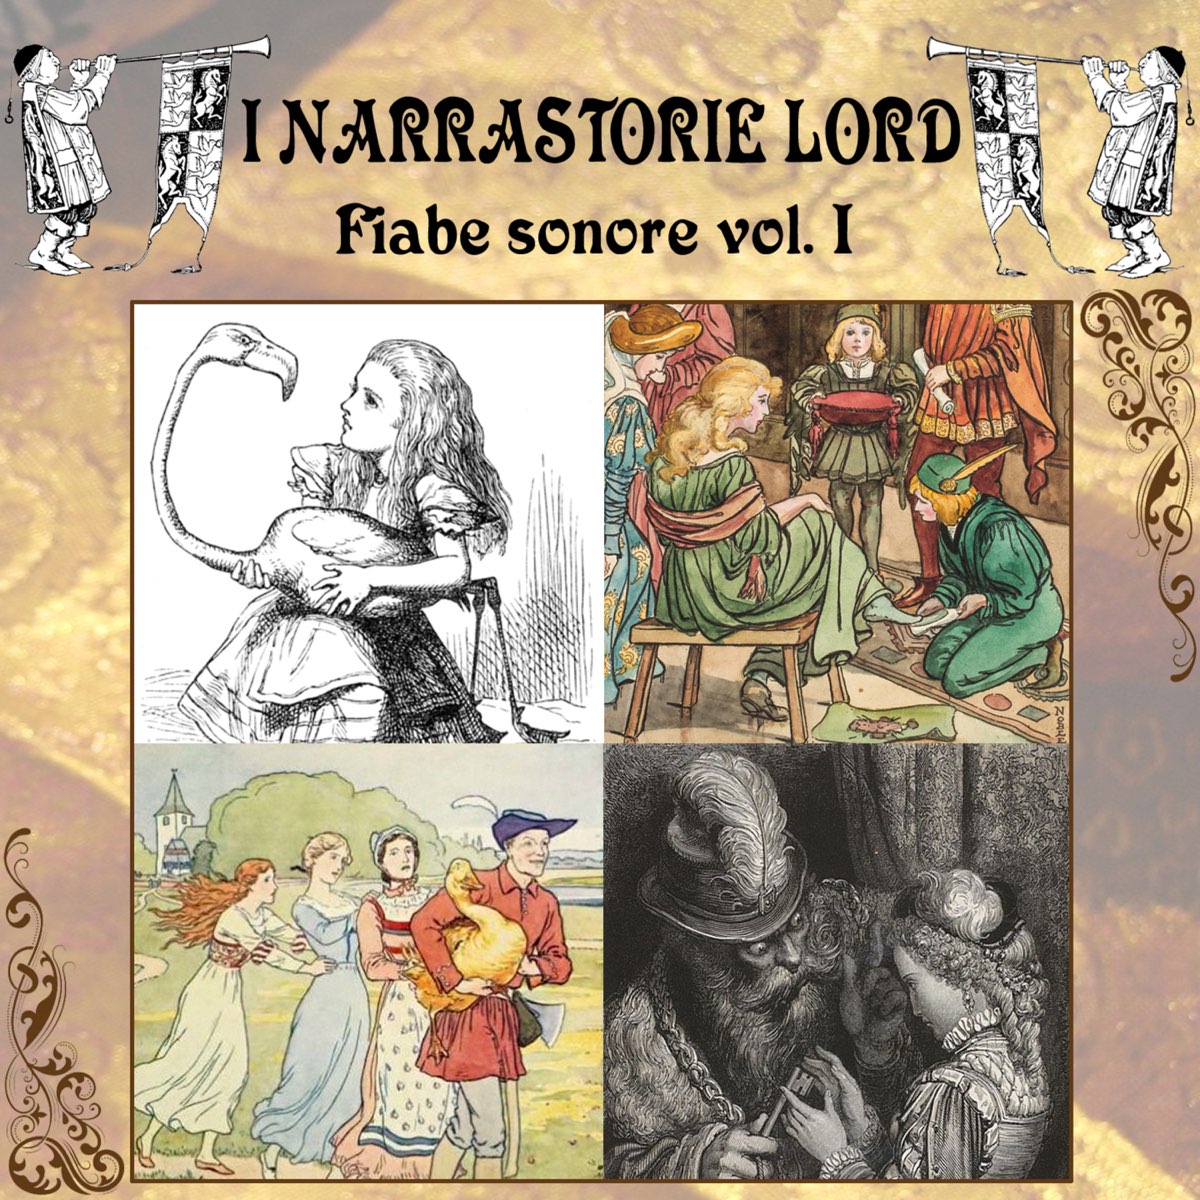 Fiabe sonore, Vol. I - Album by I Narrastorie Lord - Apple Music